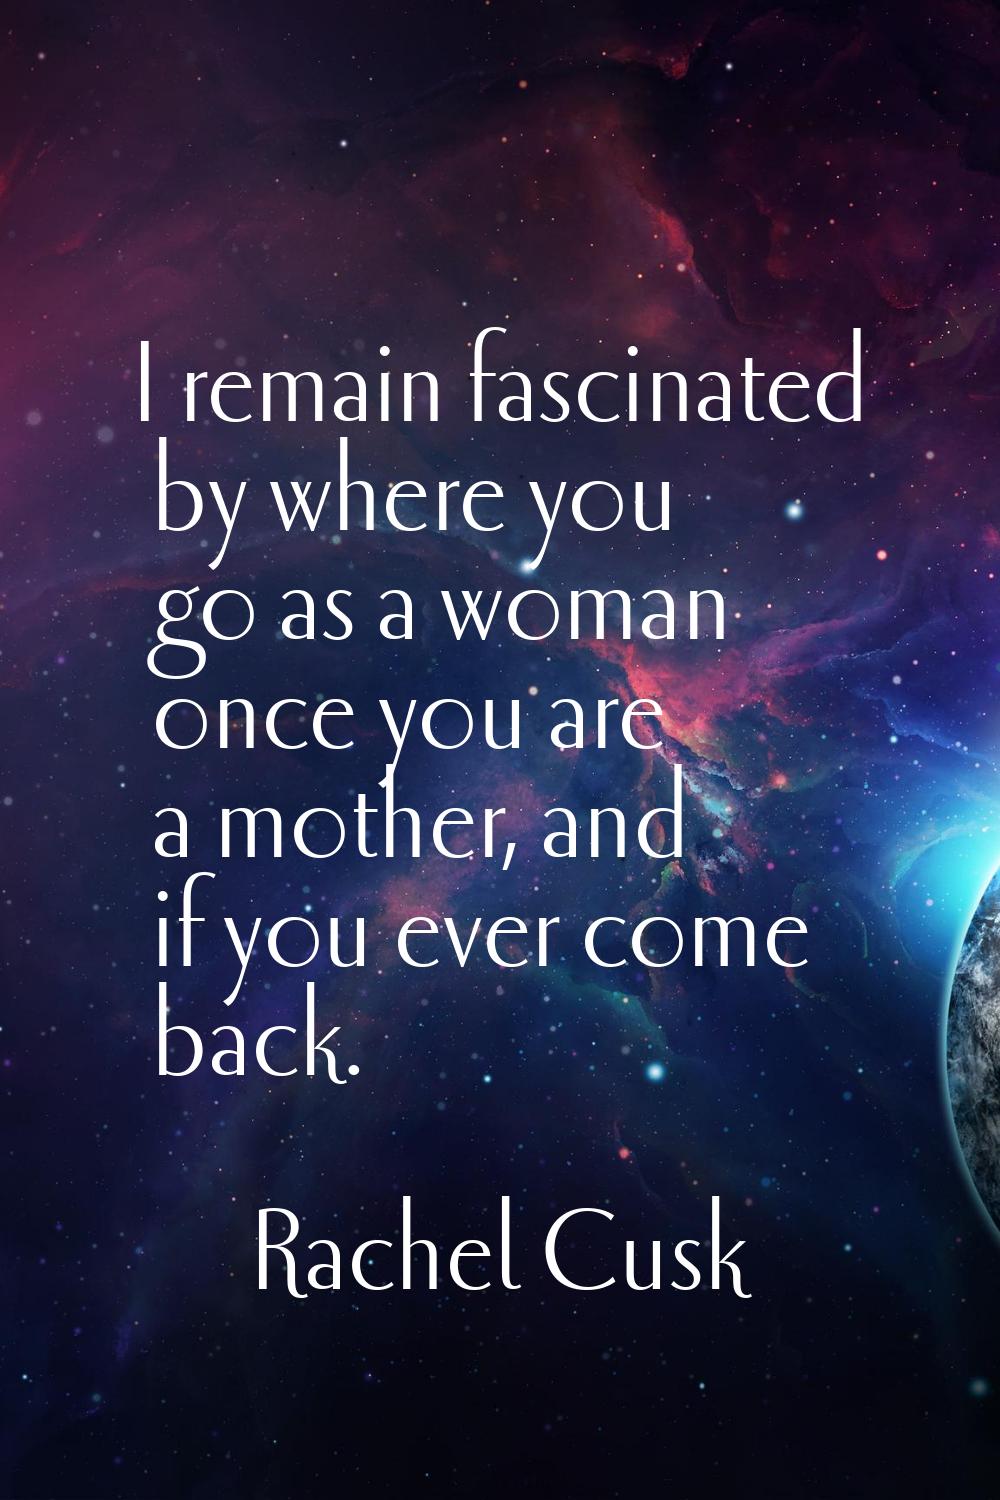 I remain fascinated by where you go as a woman once you are a mother, and if you ever come back.